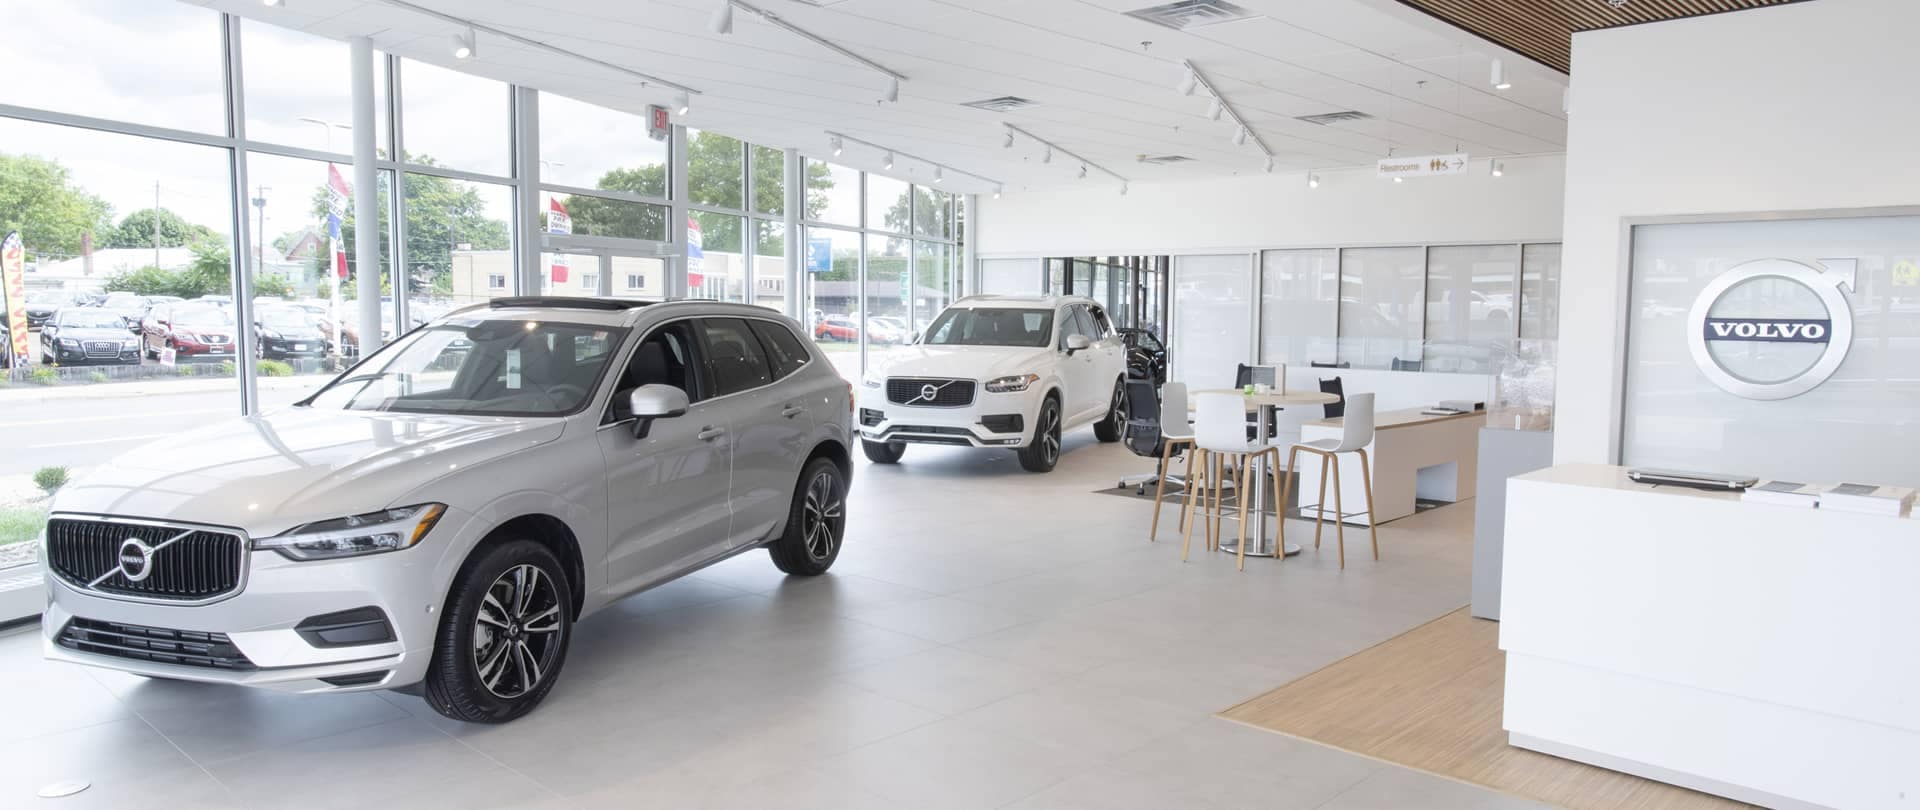 An electric Volvo SUV being charged in a large open room